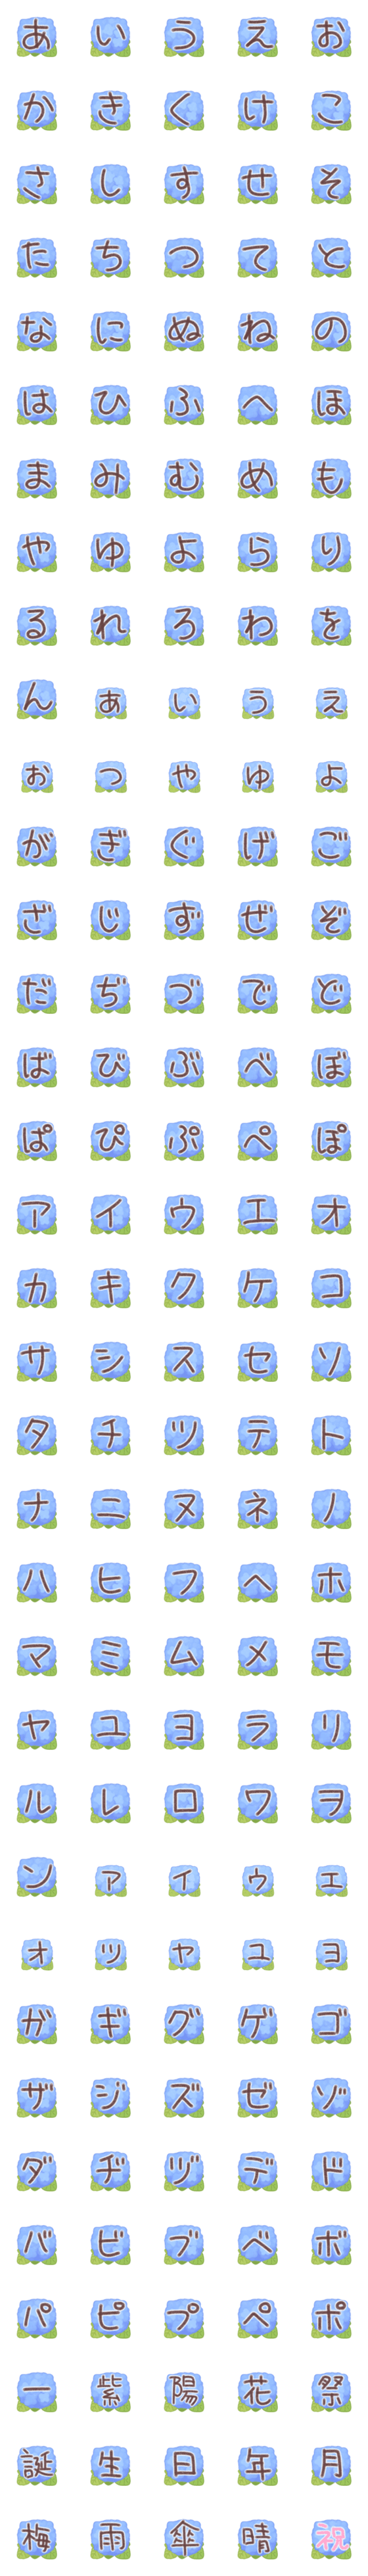 [LINE絵文字]あじさい文字フォント1【青】の画像一覧